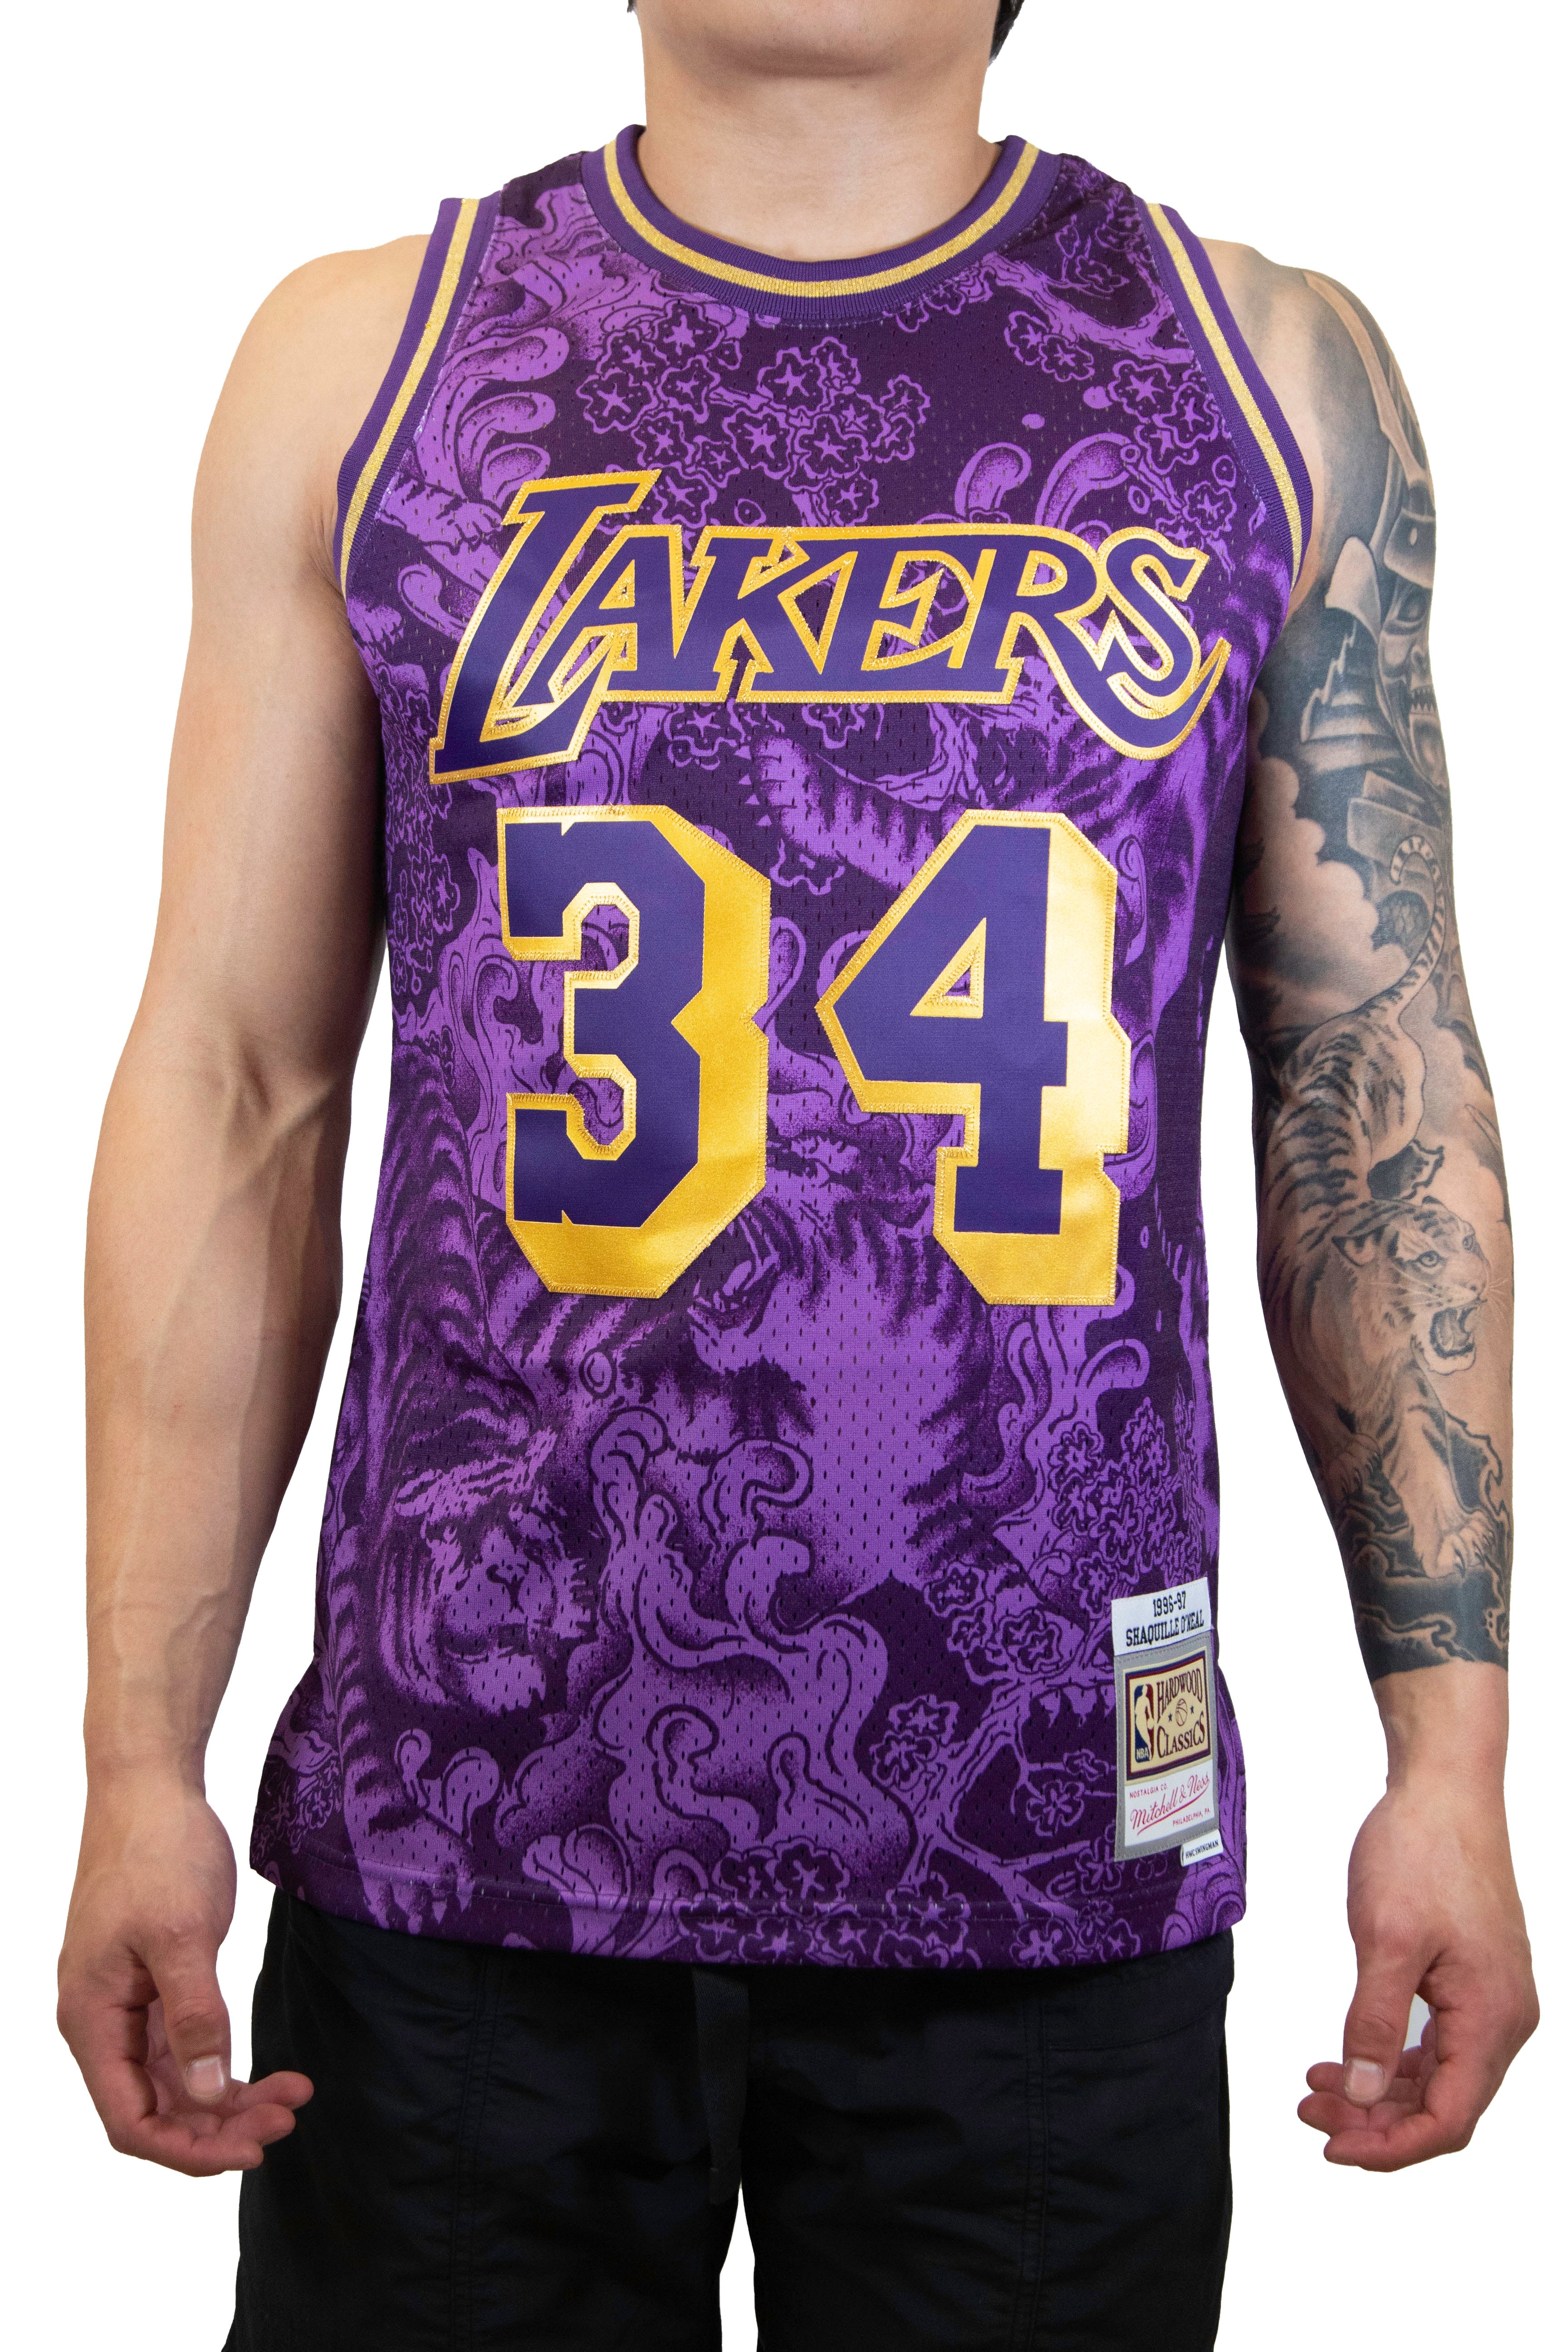 Mitchell & Ness NBA Los Angeles Lakers (Shaquille O'Neal) - Chinese New Year 2x